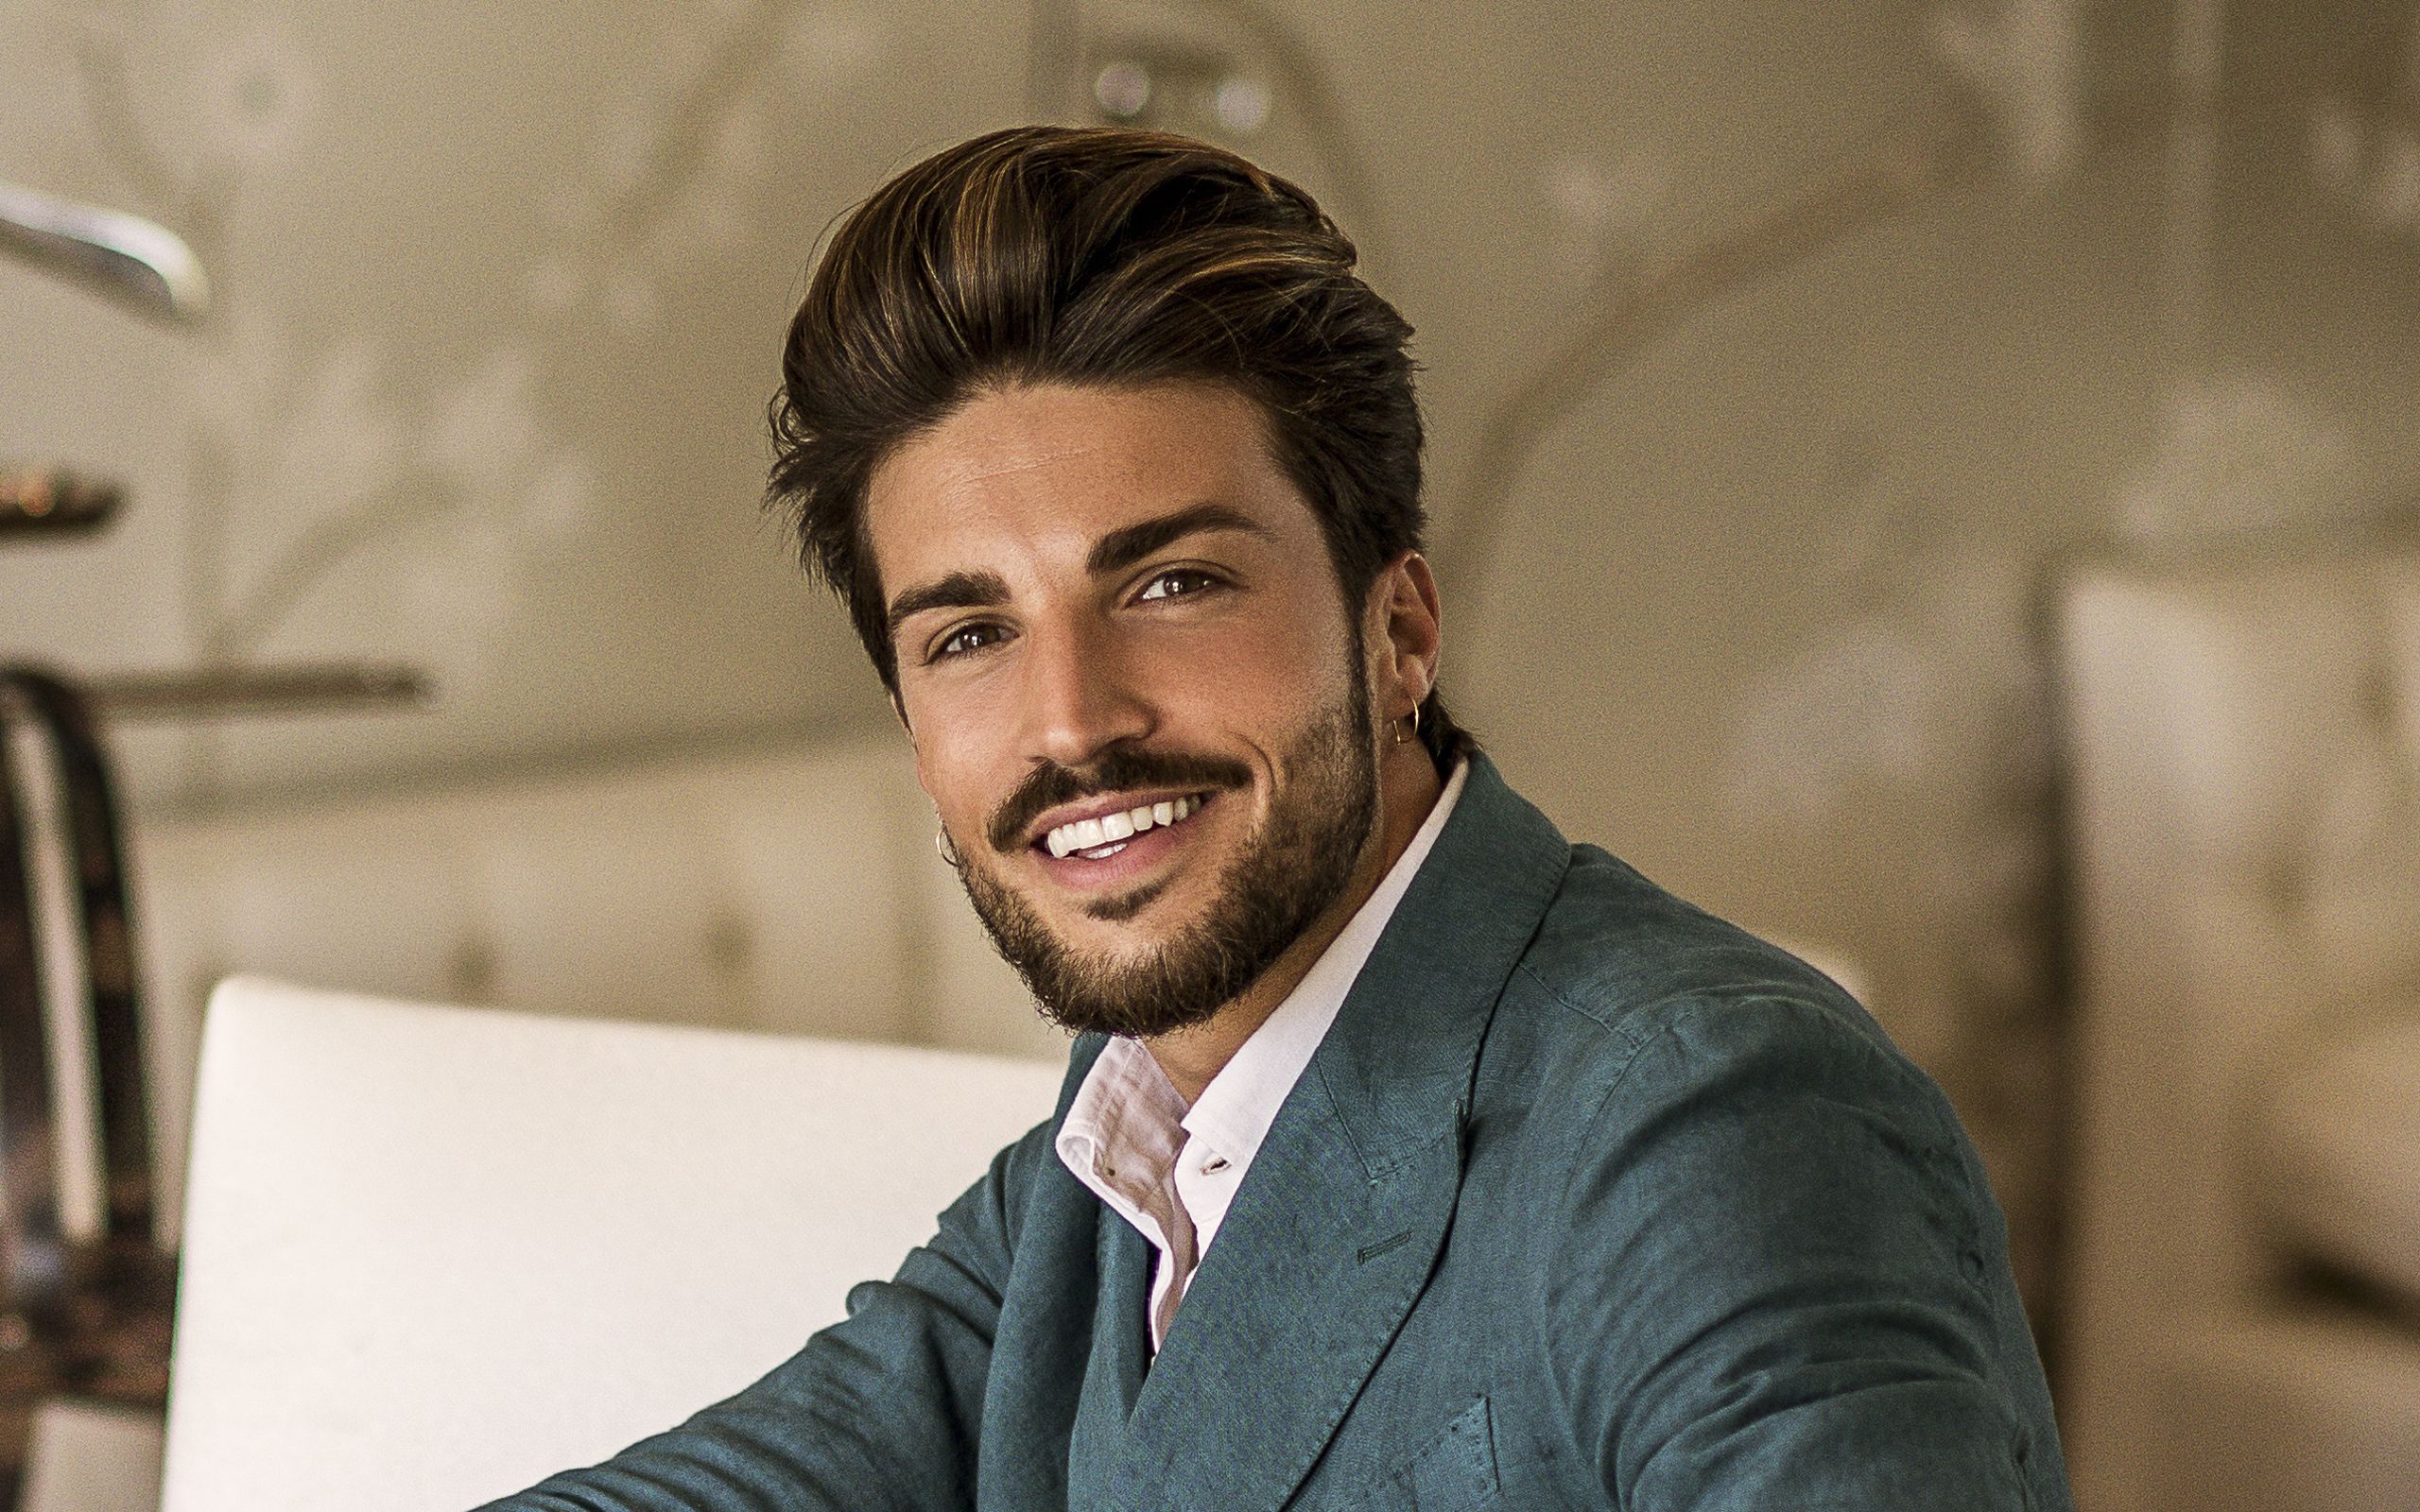 Download wallpaper Mariano Di Vaio, portrait, italian actor, photohoot, blue mens suit for desktop with resolution 2560x1600. High Quality HD picture wallpaper